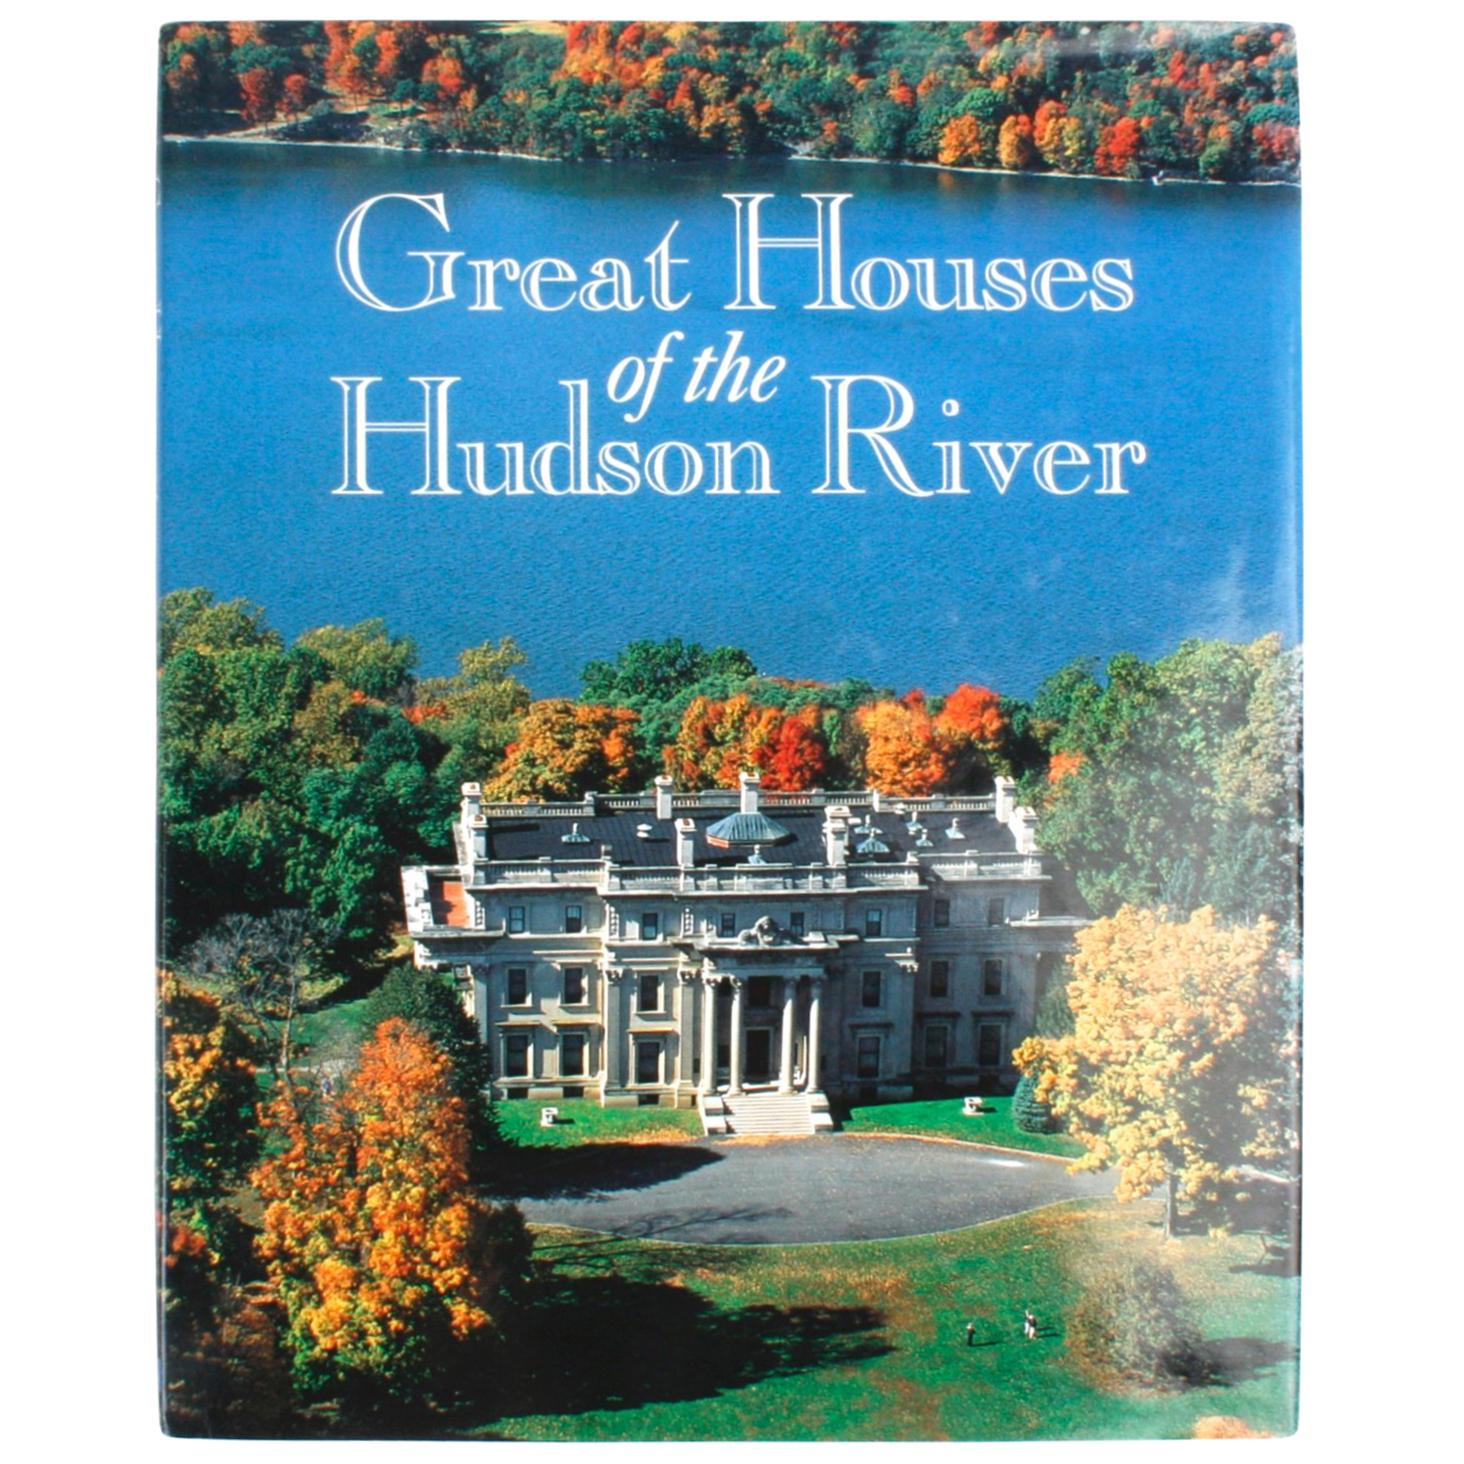 Great Houses of the Hudson River, First Edition